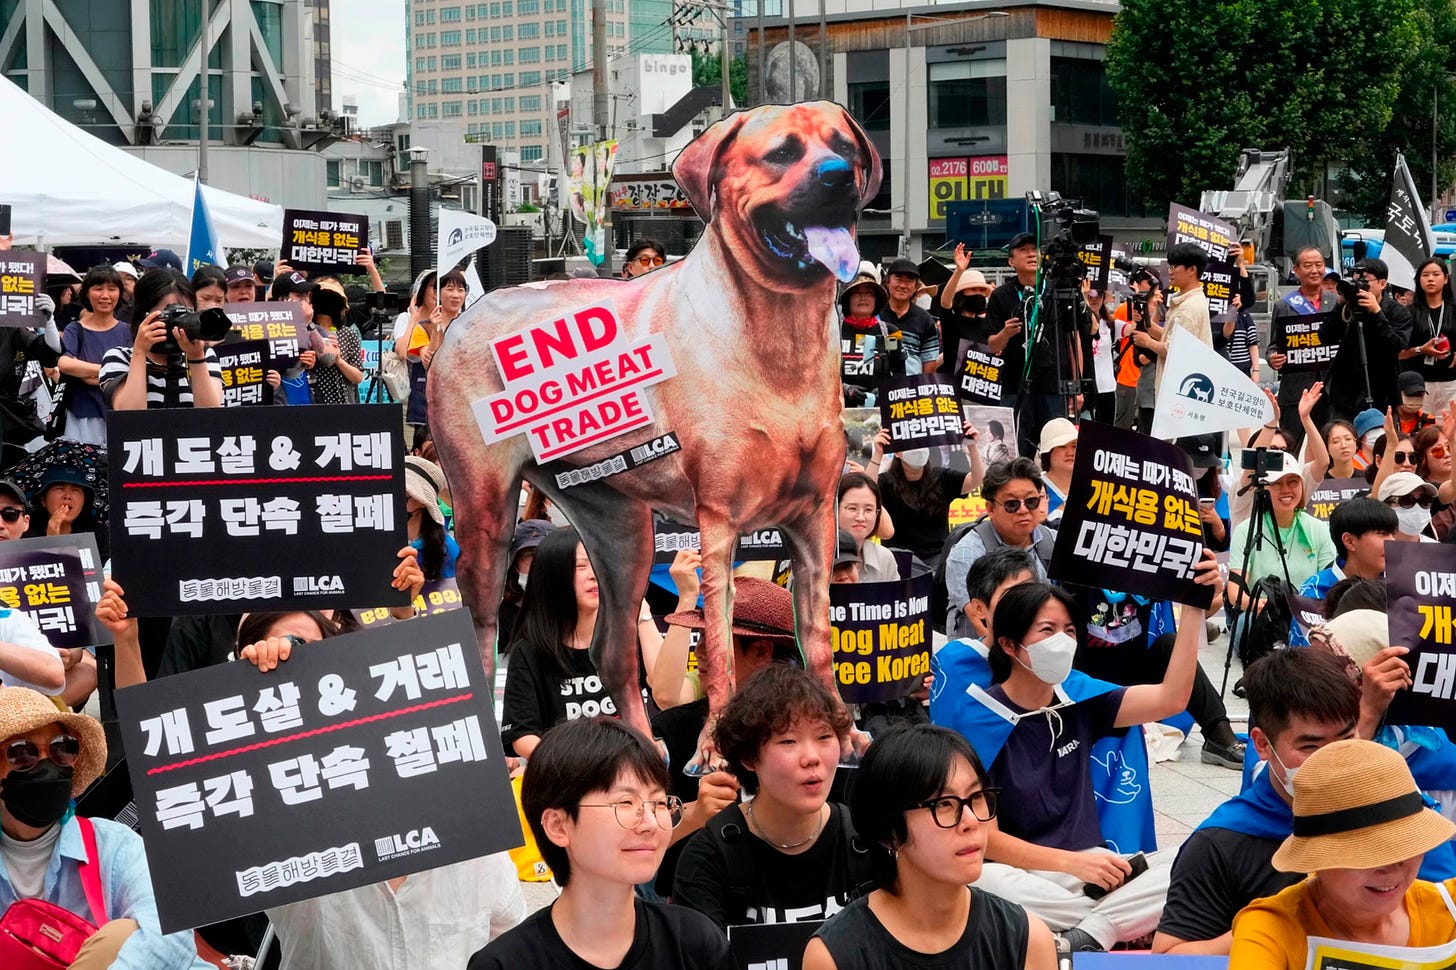 Hundreds of people with signs protesting against the Dog meat trade.